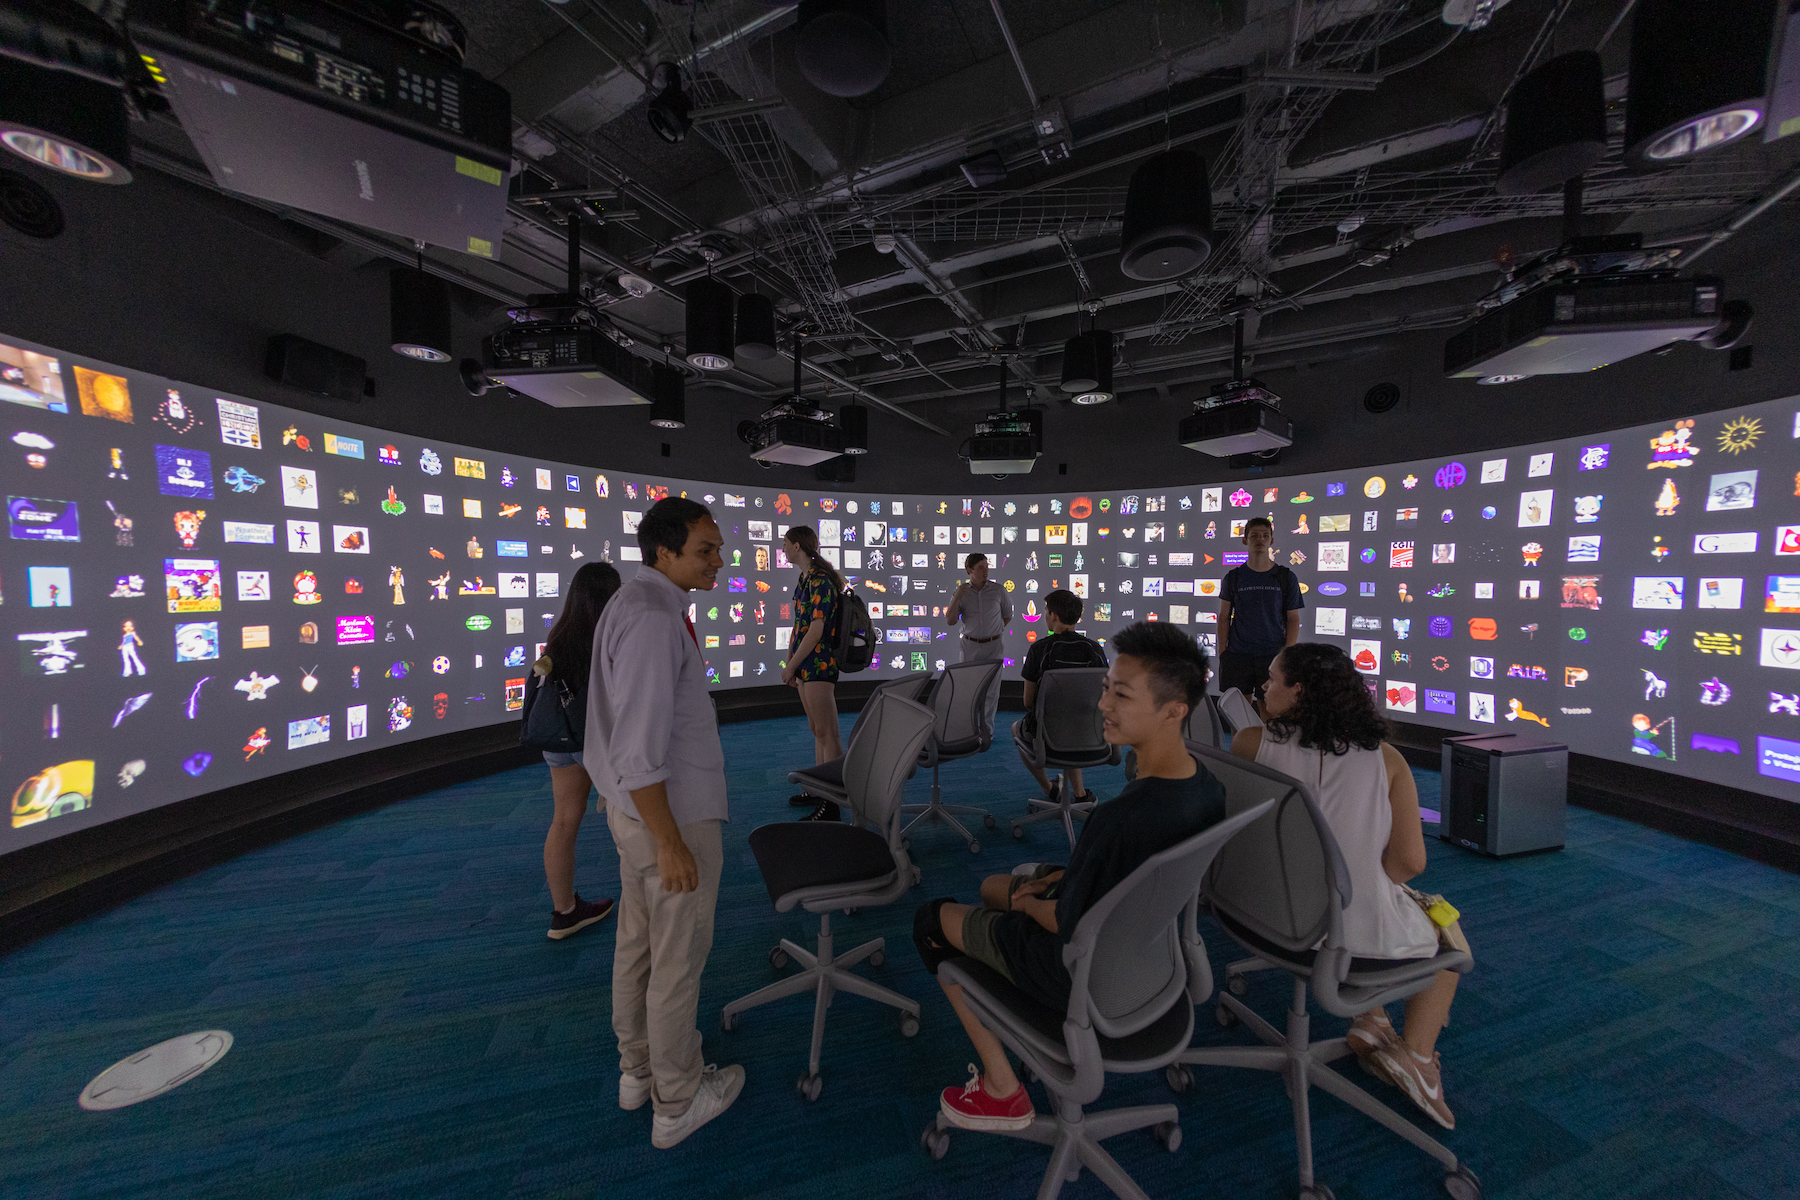 Large curved projection screen with muliple colorful squares. A group of people standing and sitting in the middle of the room. 